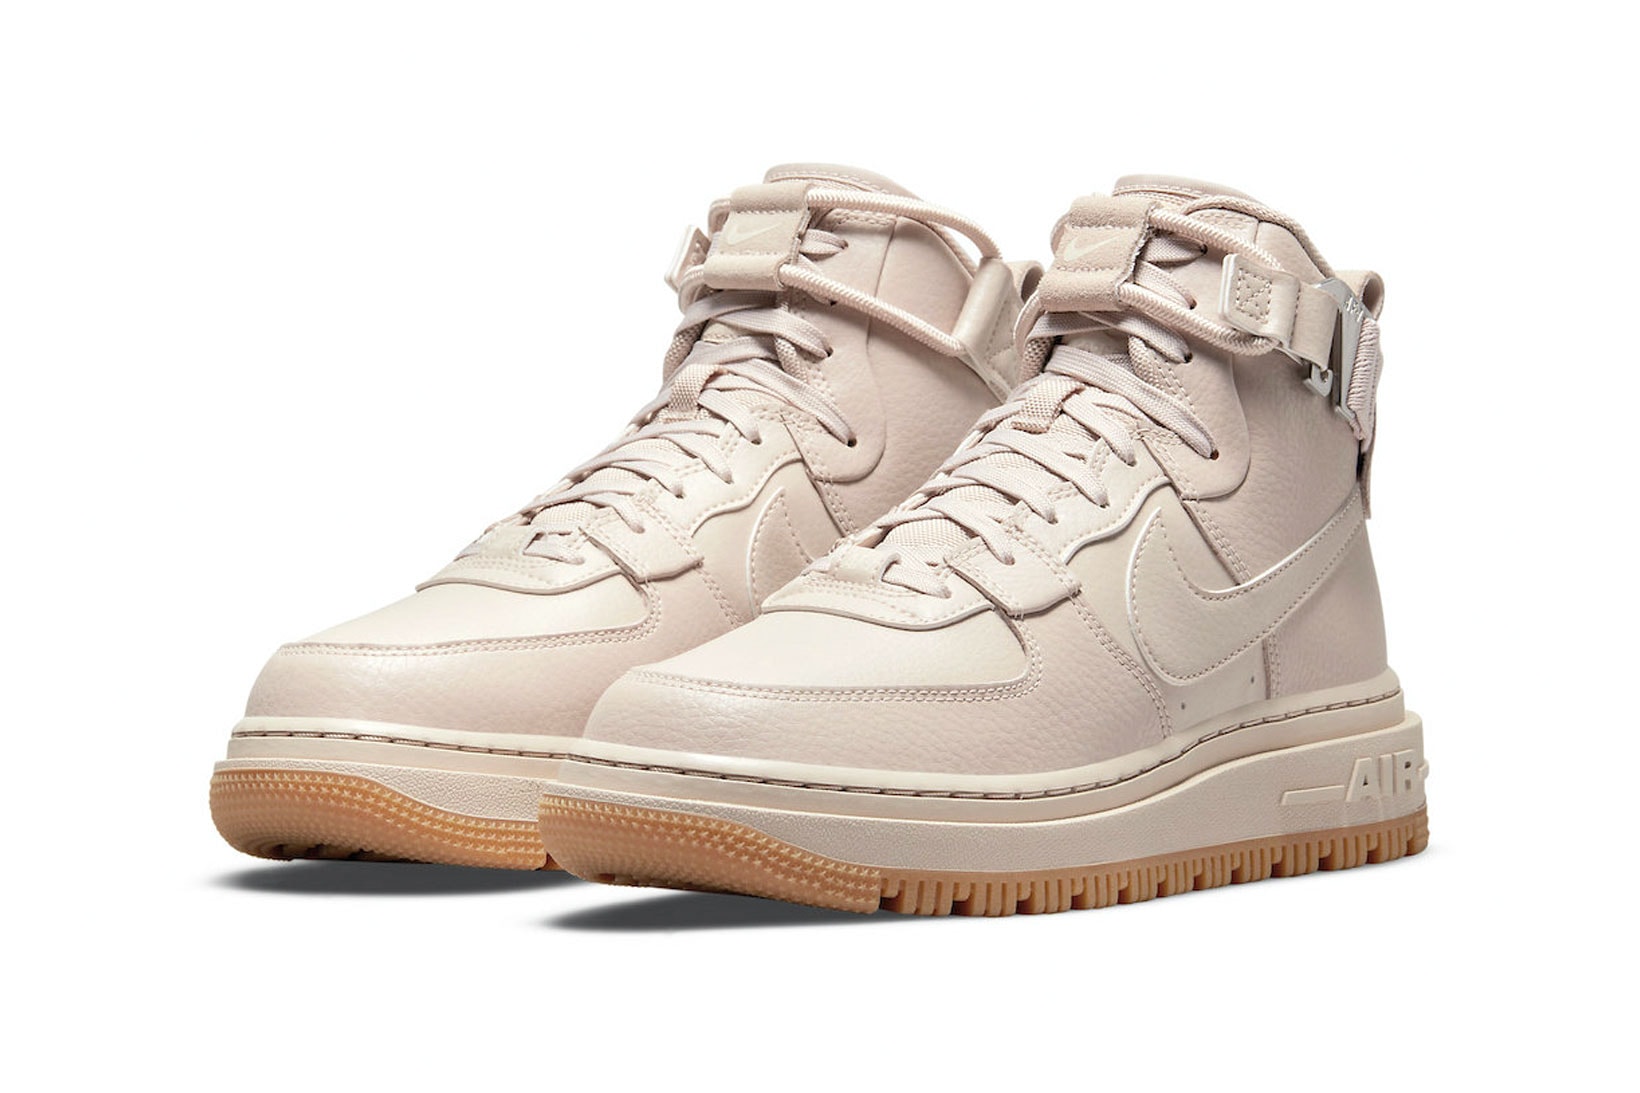 Nike Air Force 1 AF1 High Utility 2.0 Arctic Pink Upper Shoelaces